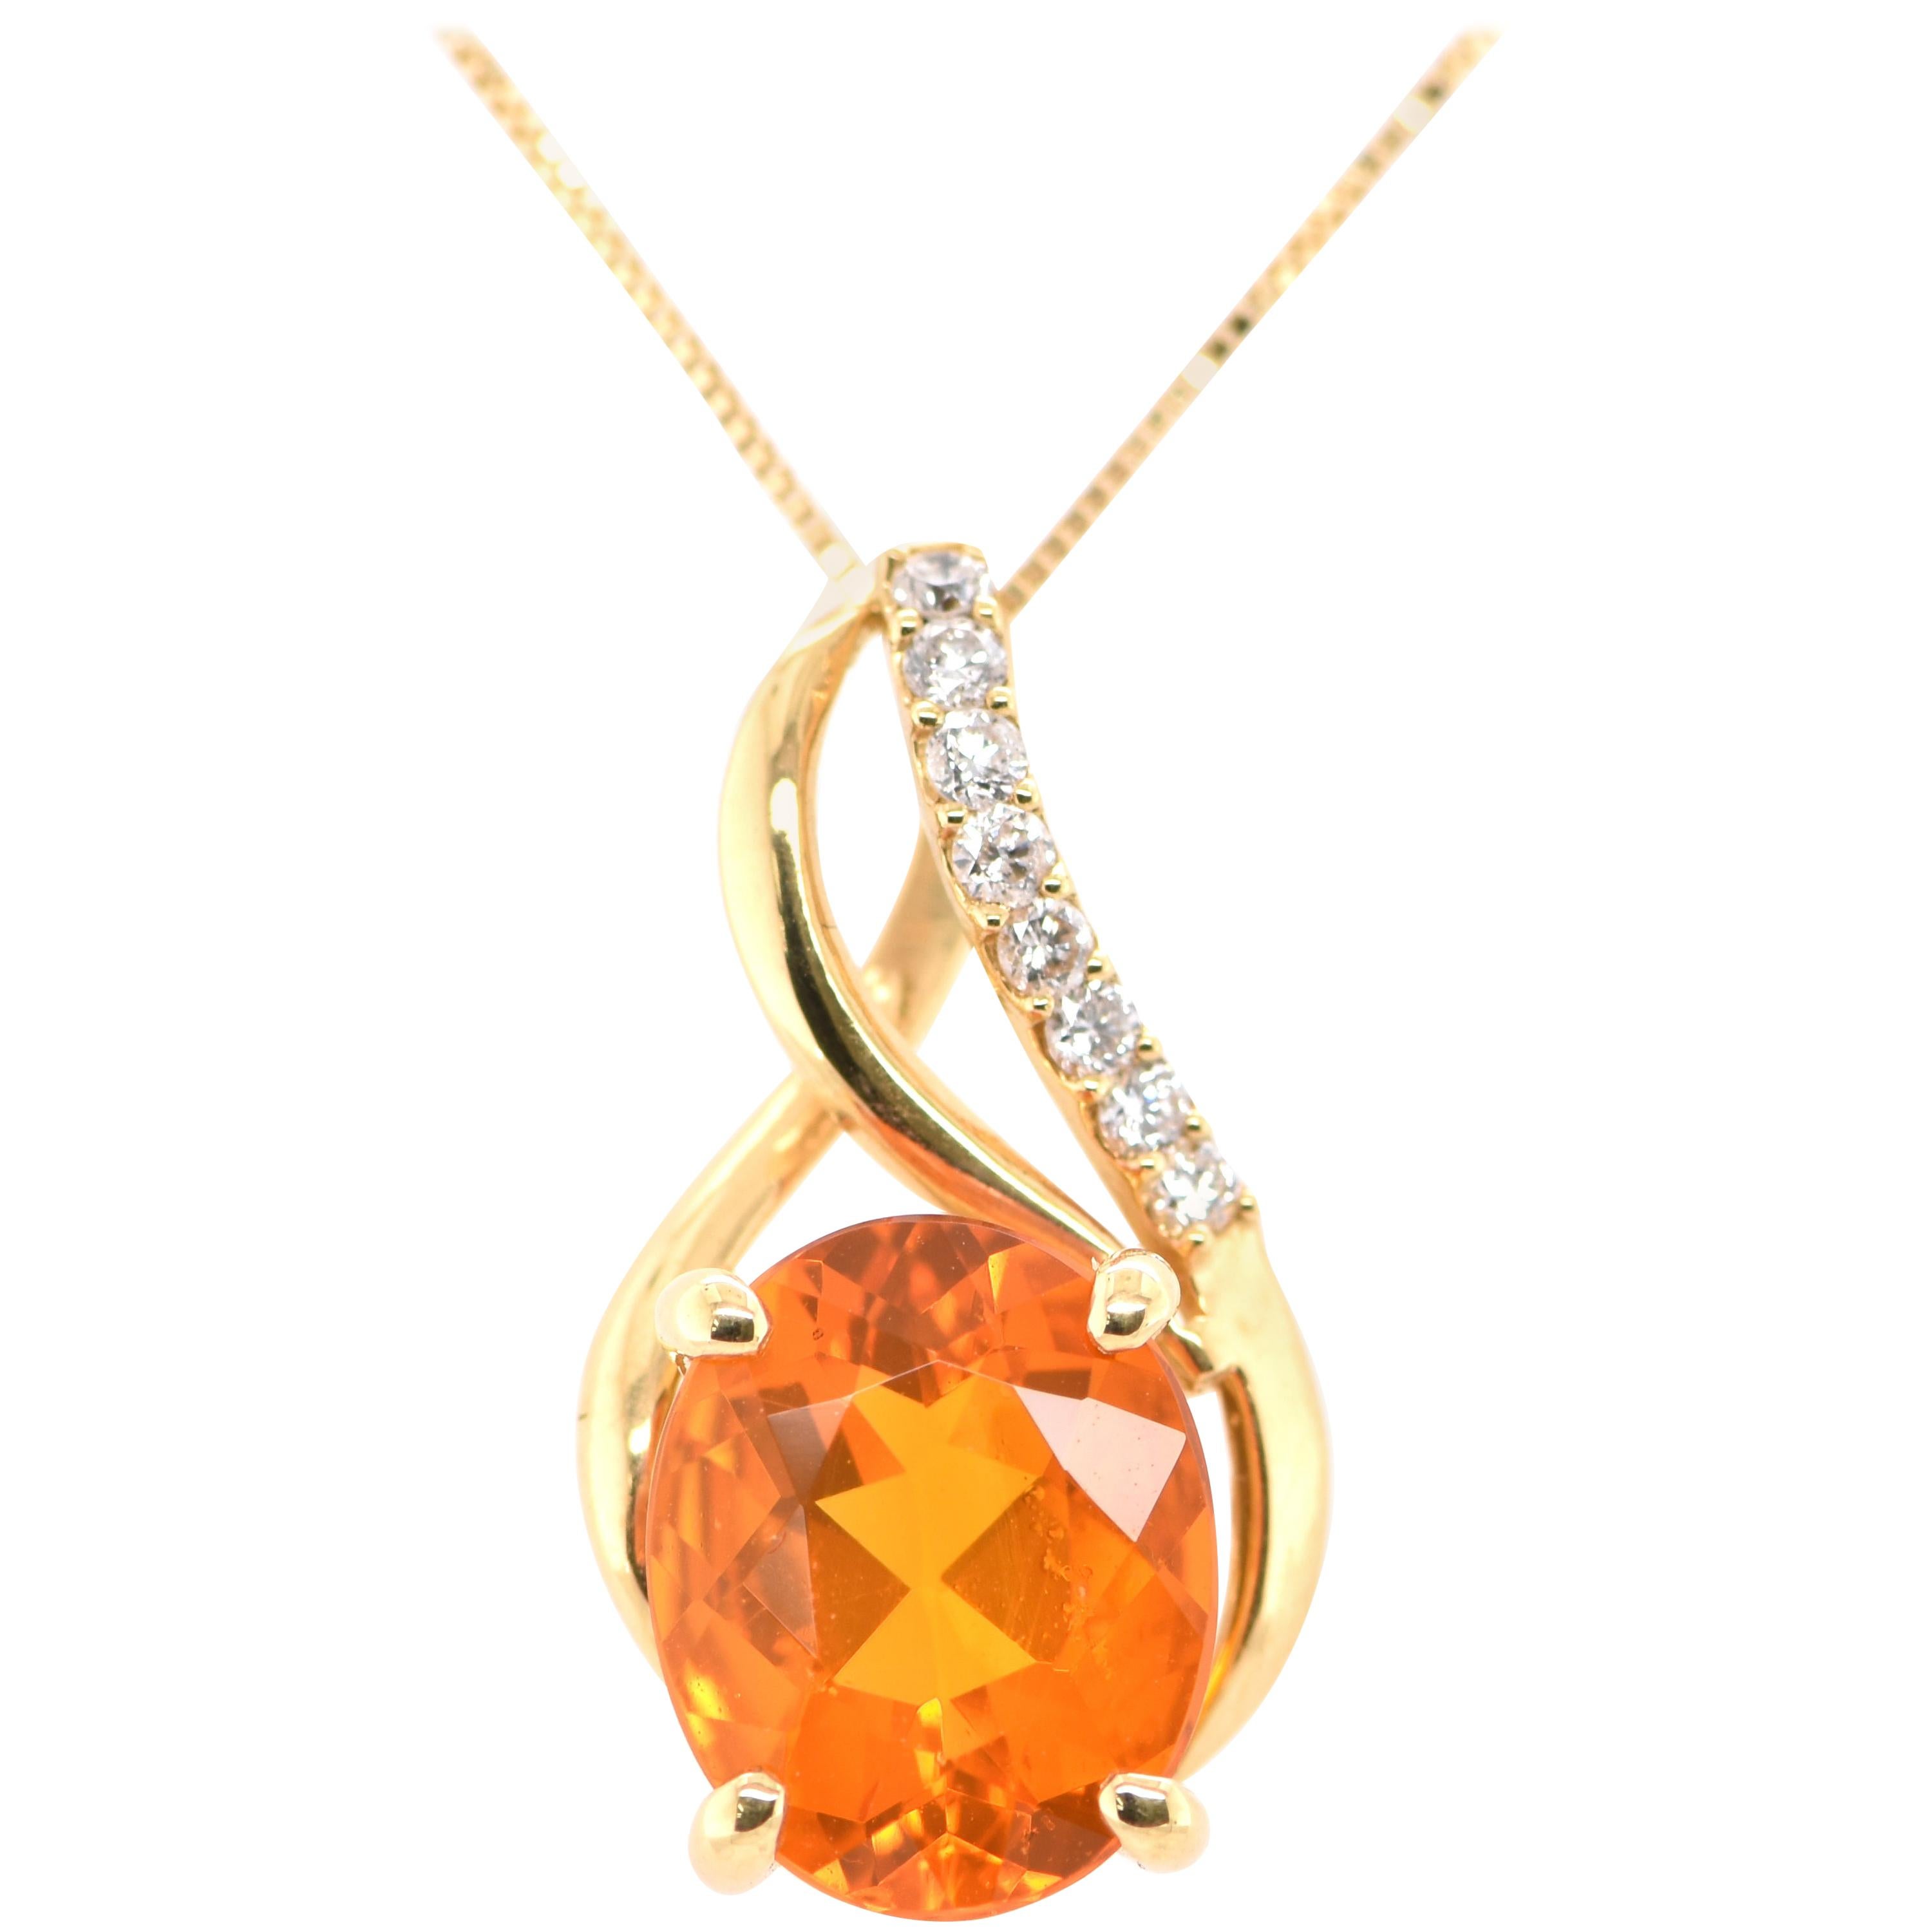 2.35 Carat Natural Faceted Fire Opal and Diamond Pendant Set in 18K Yellow Gold